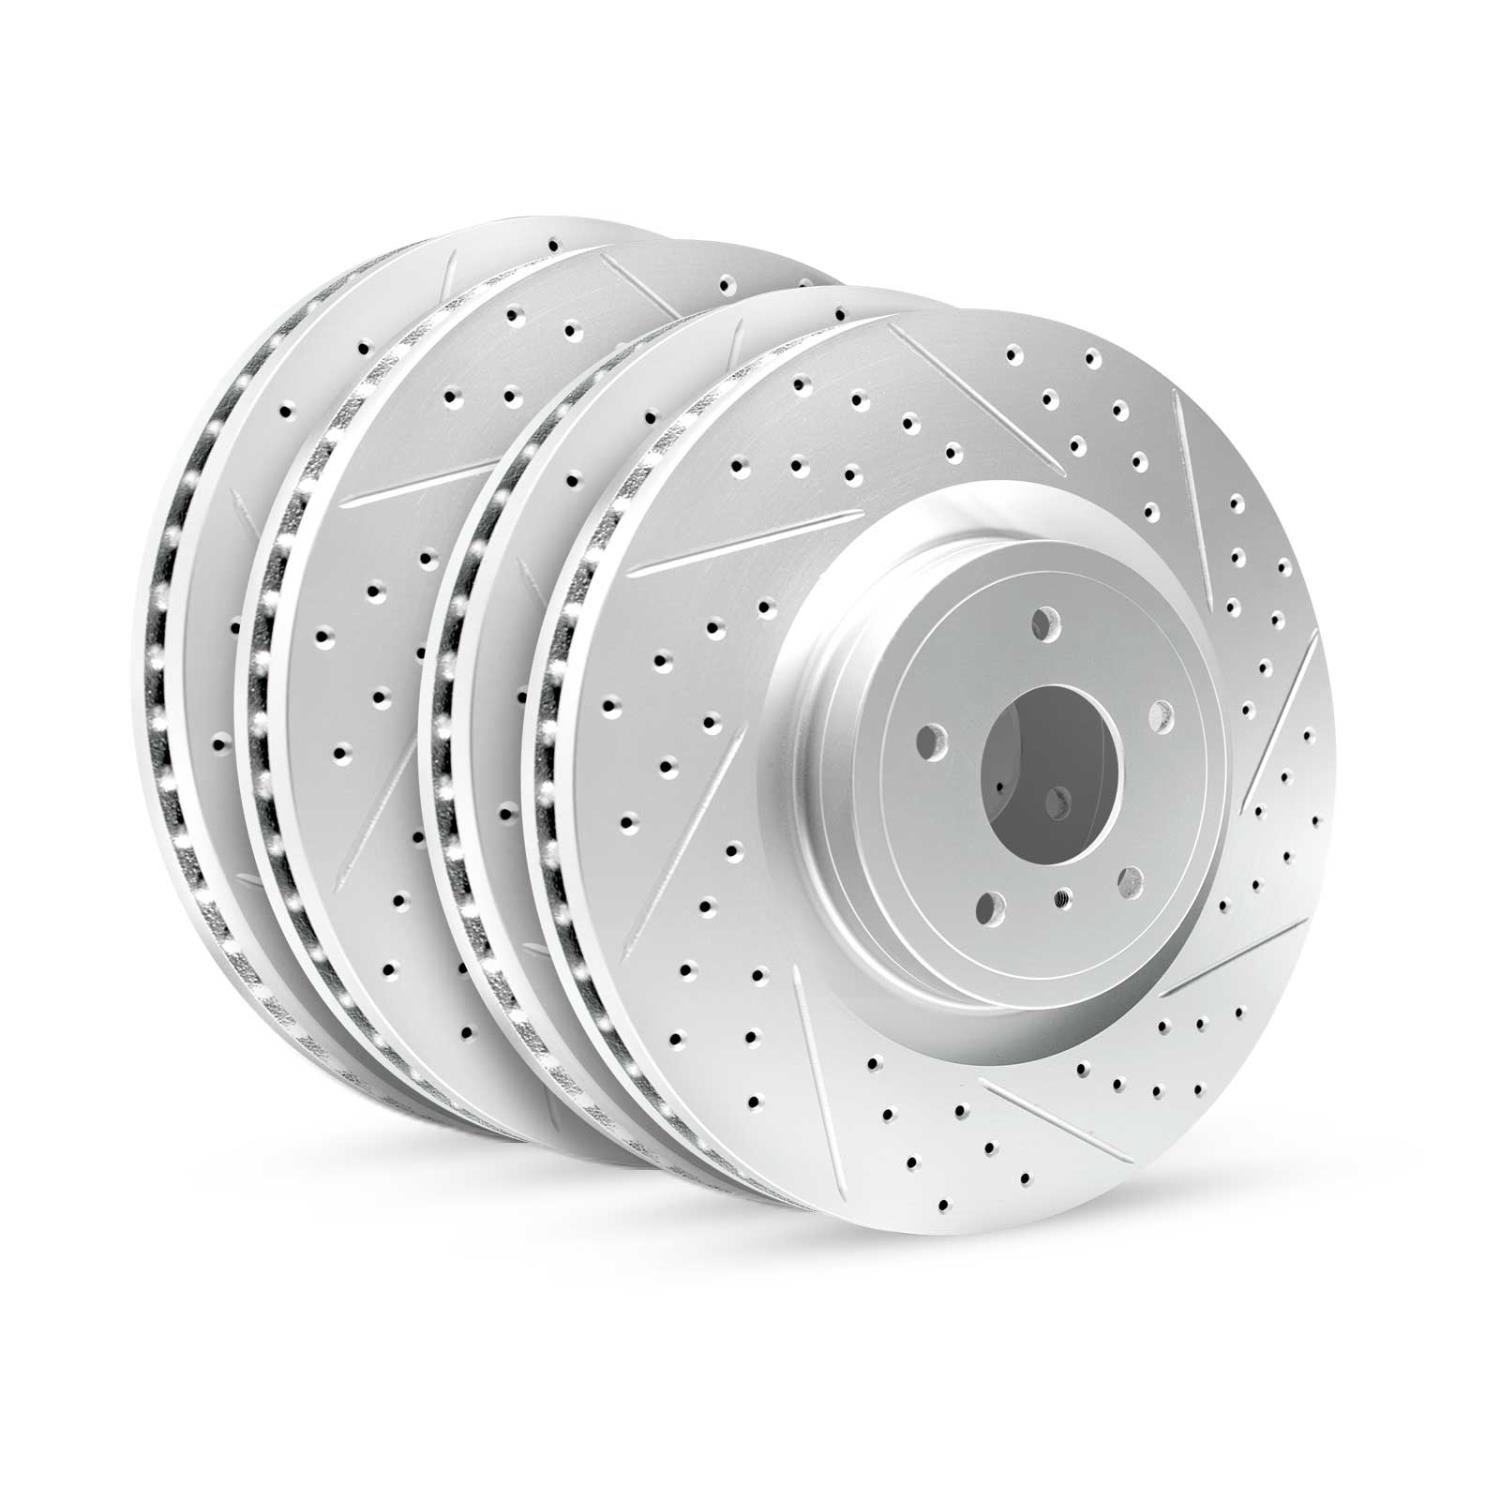 GEO-Carbon Drilled/Slotted Rotors, 2004-2009 Lexus/Toyota/Scion, Position: Front/Rear